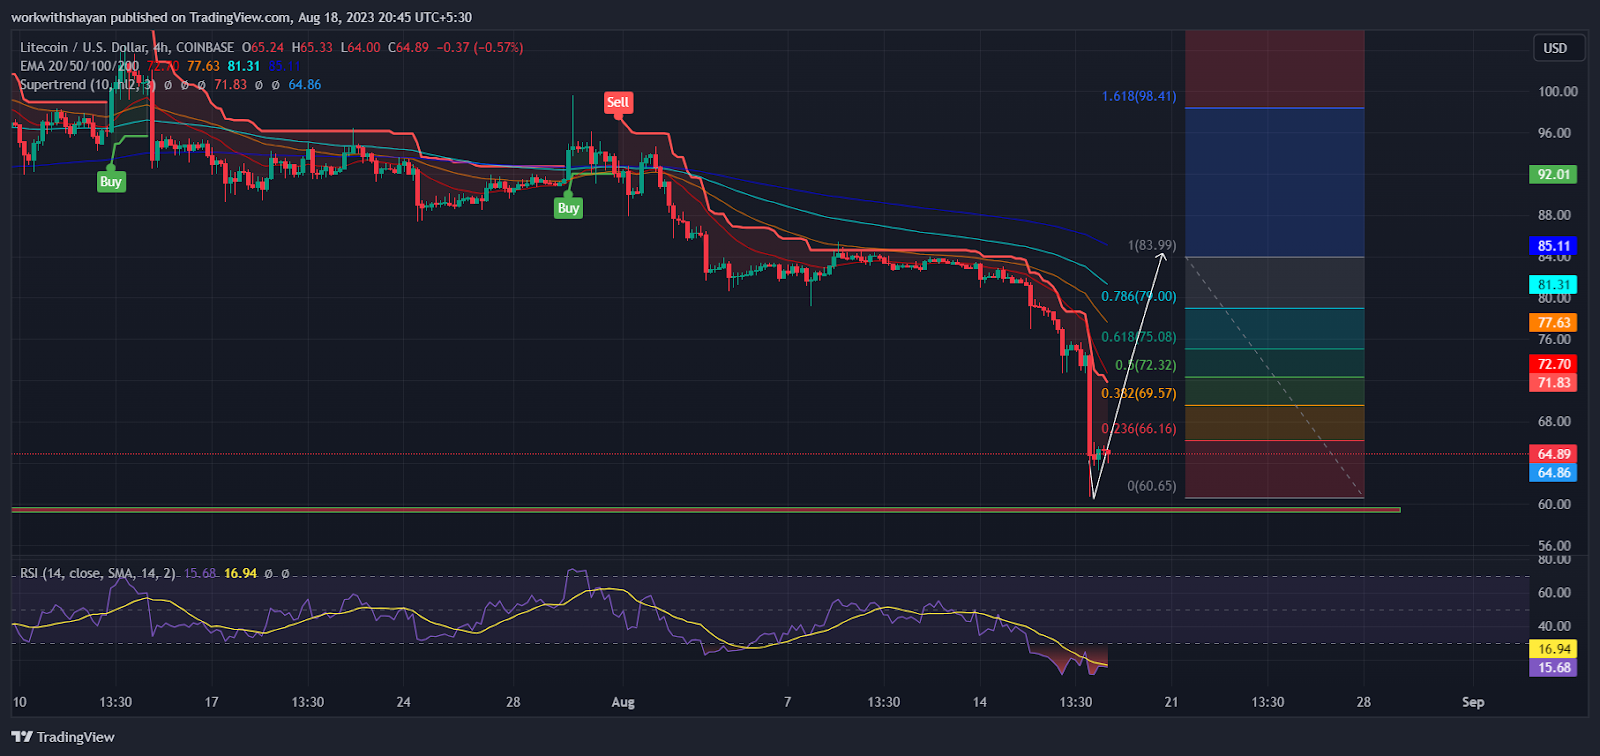 VOBmVkp8Ze3vMyJkb Crypto Market Analysis: Shiba Inu (SHIB) And Litecoin (LTC) Prices Rebound From Robust Support Zone – What’s Next?